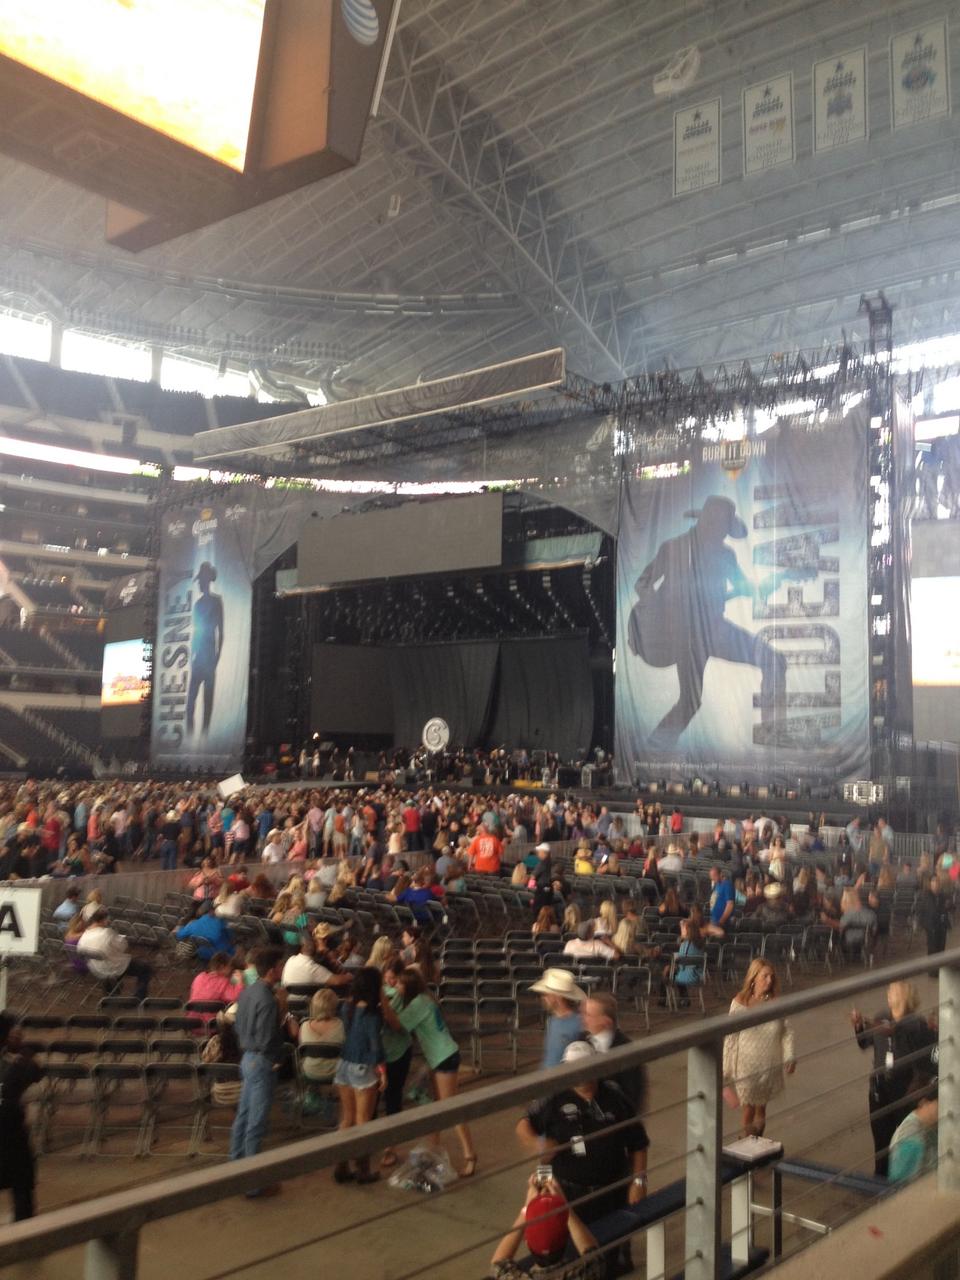 section c111, row 1 seat view  for concert - at&t stadium (cowboys stadium)